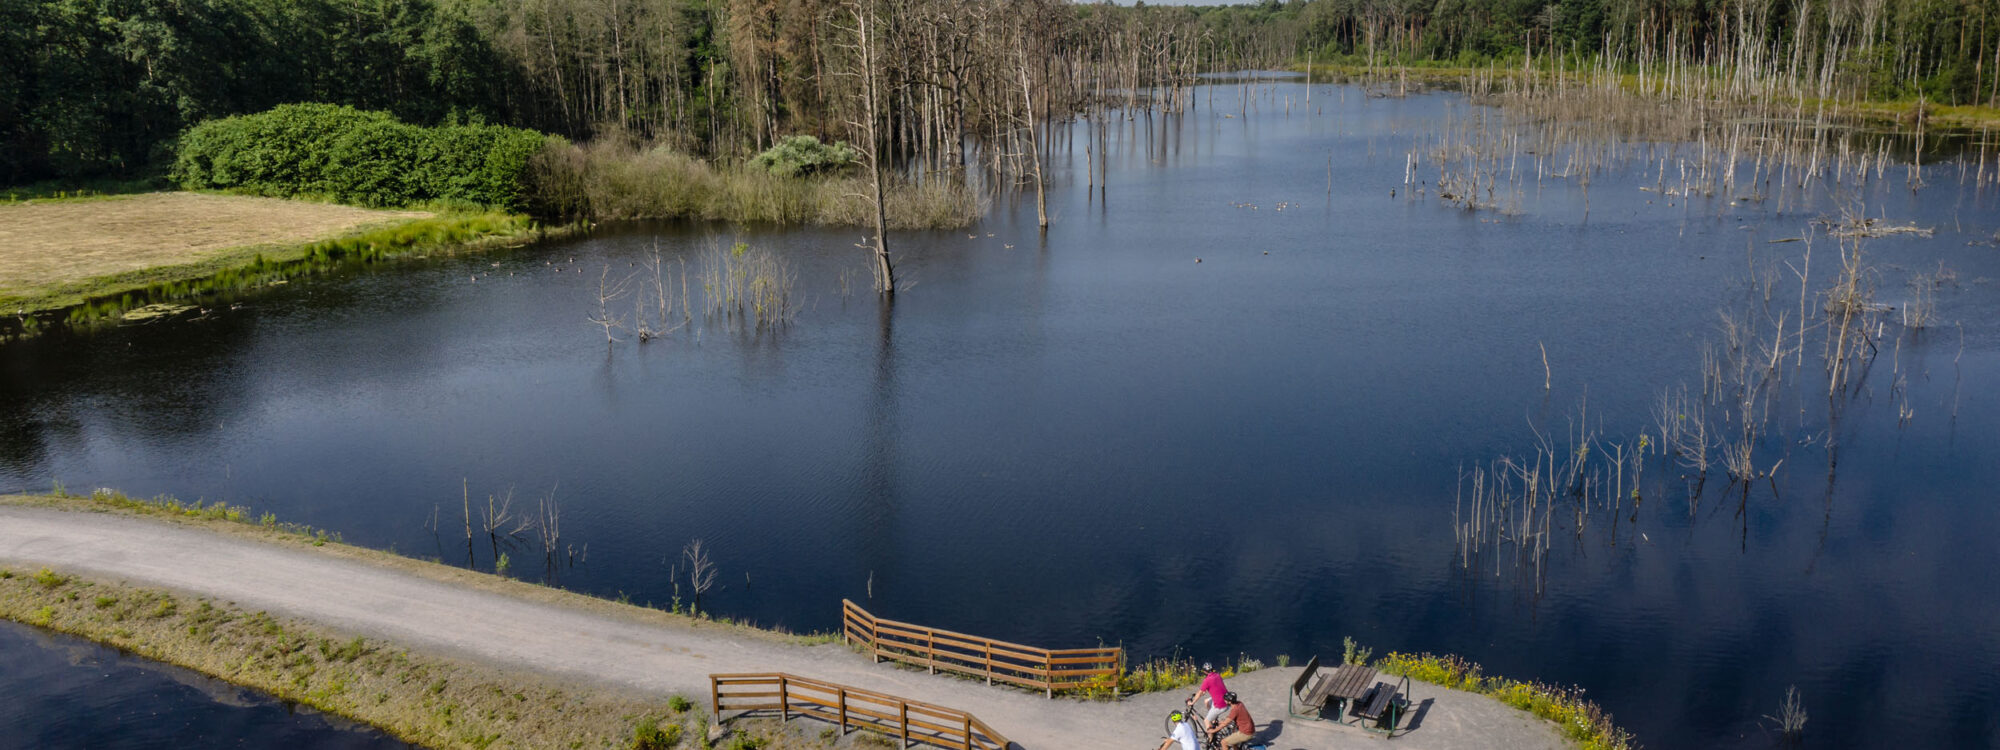 The photo shows cyclists on the Pfingstsee in the Kirchheller Heide in Bottrop on the RevierRoute Landpartie